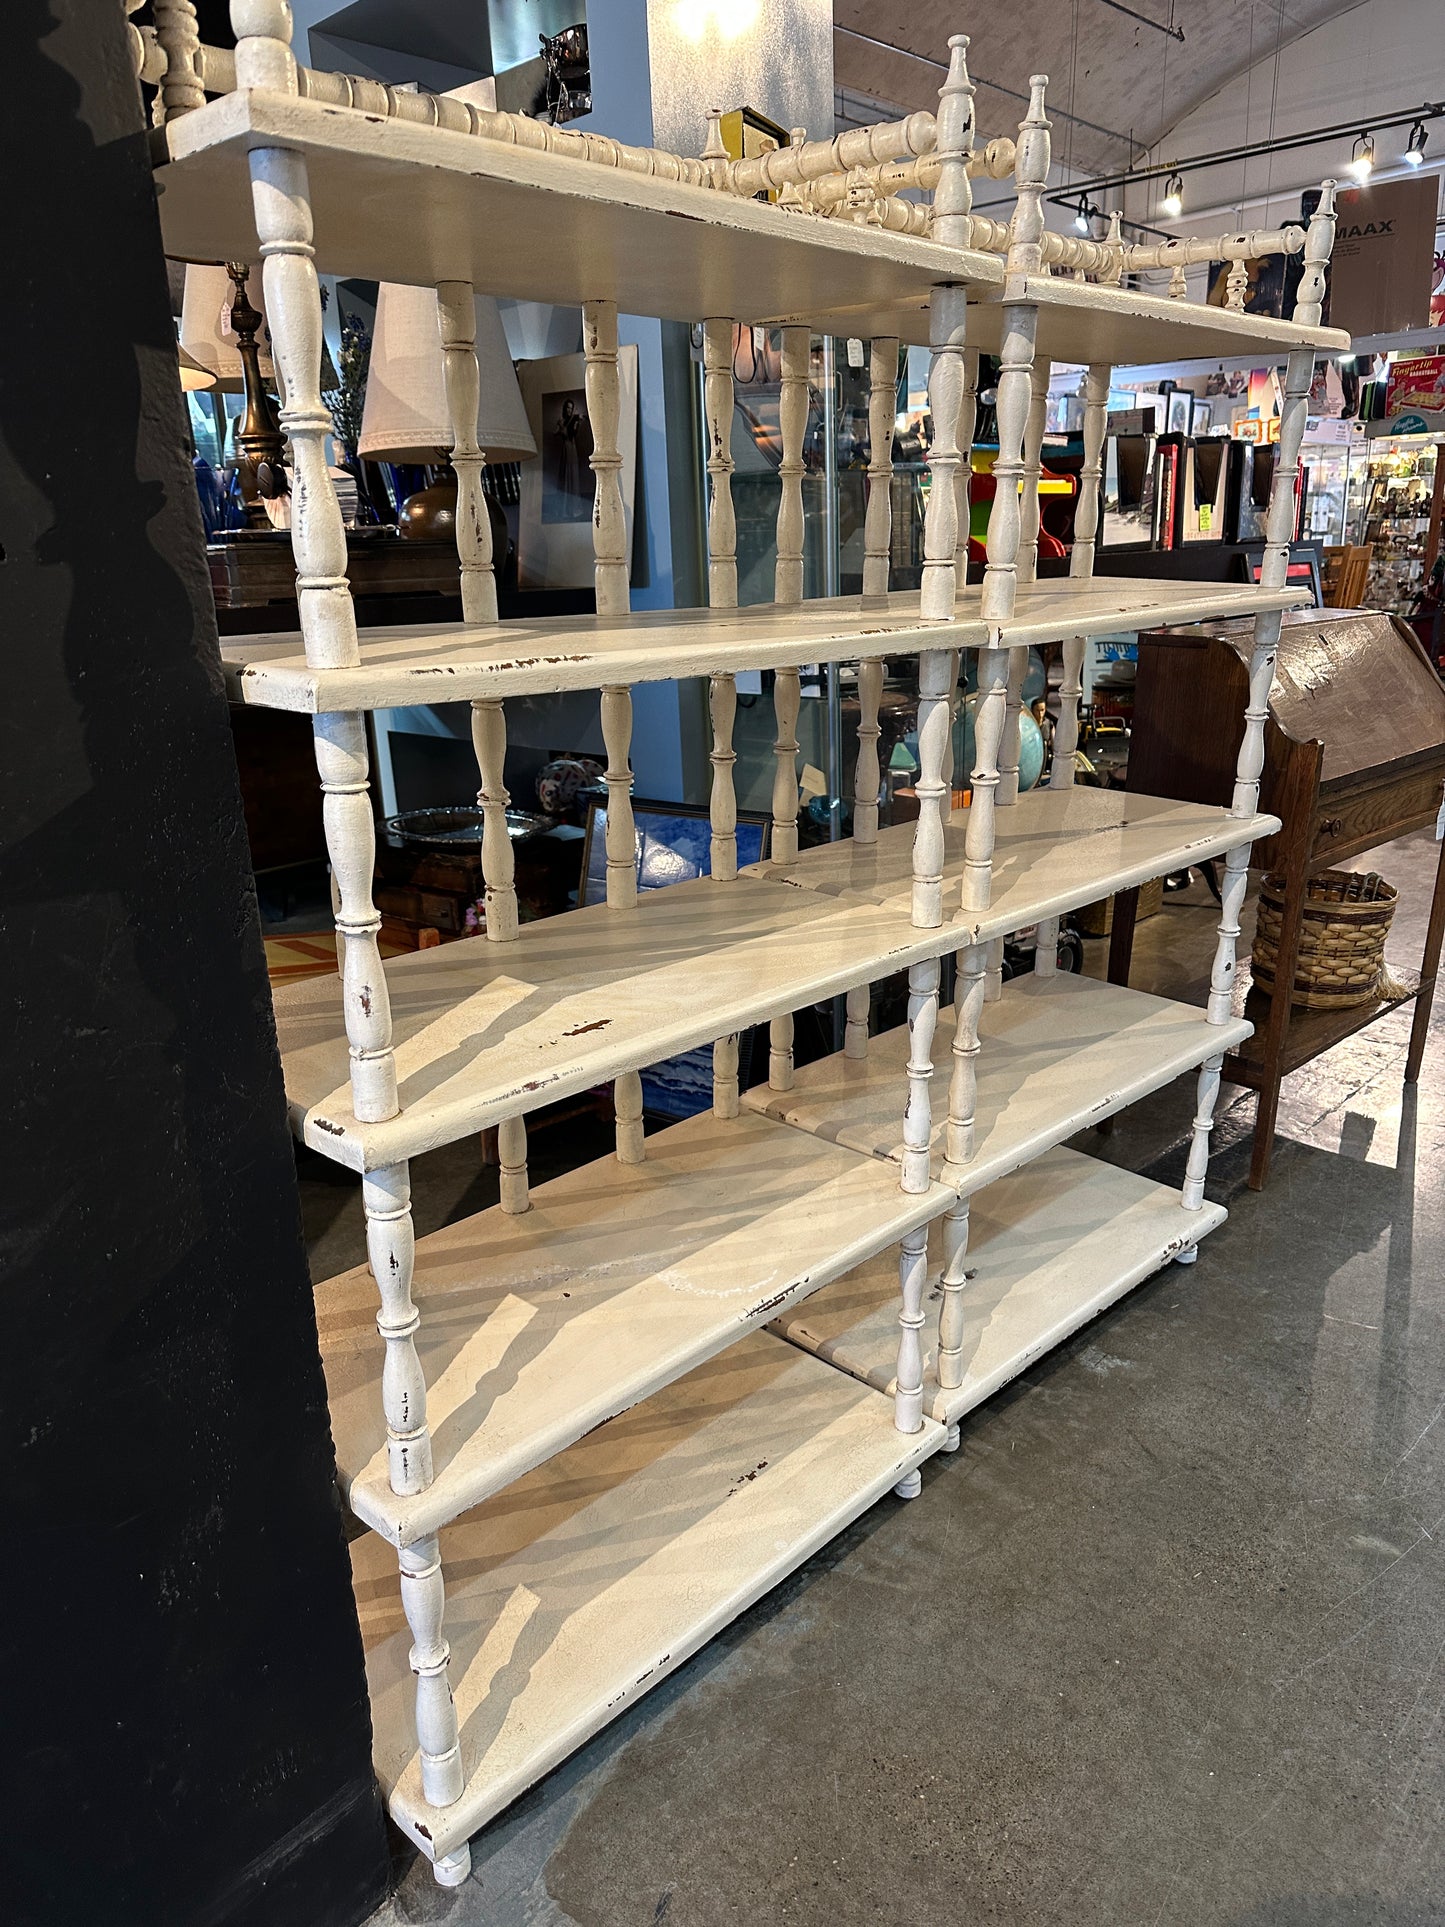 Spindle Standing Shelf(s) Painted